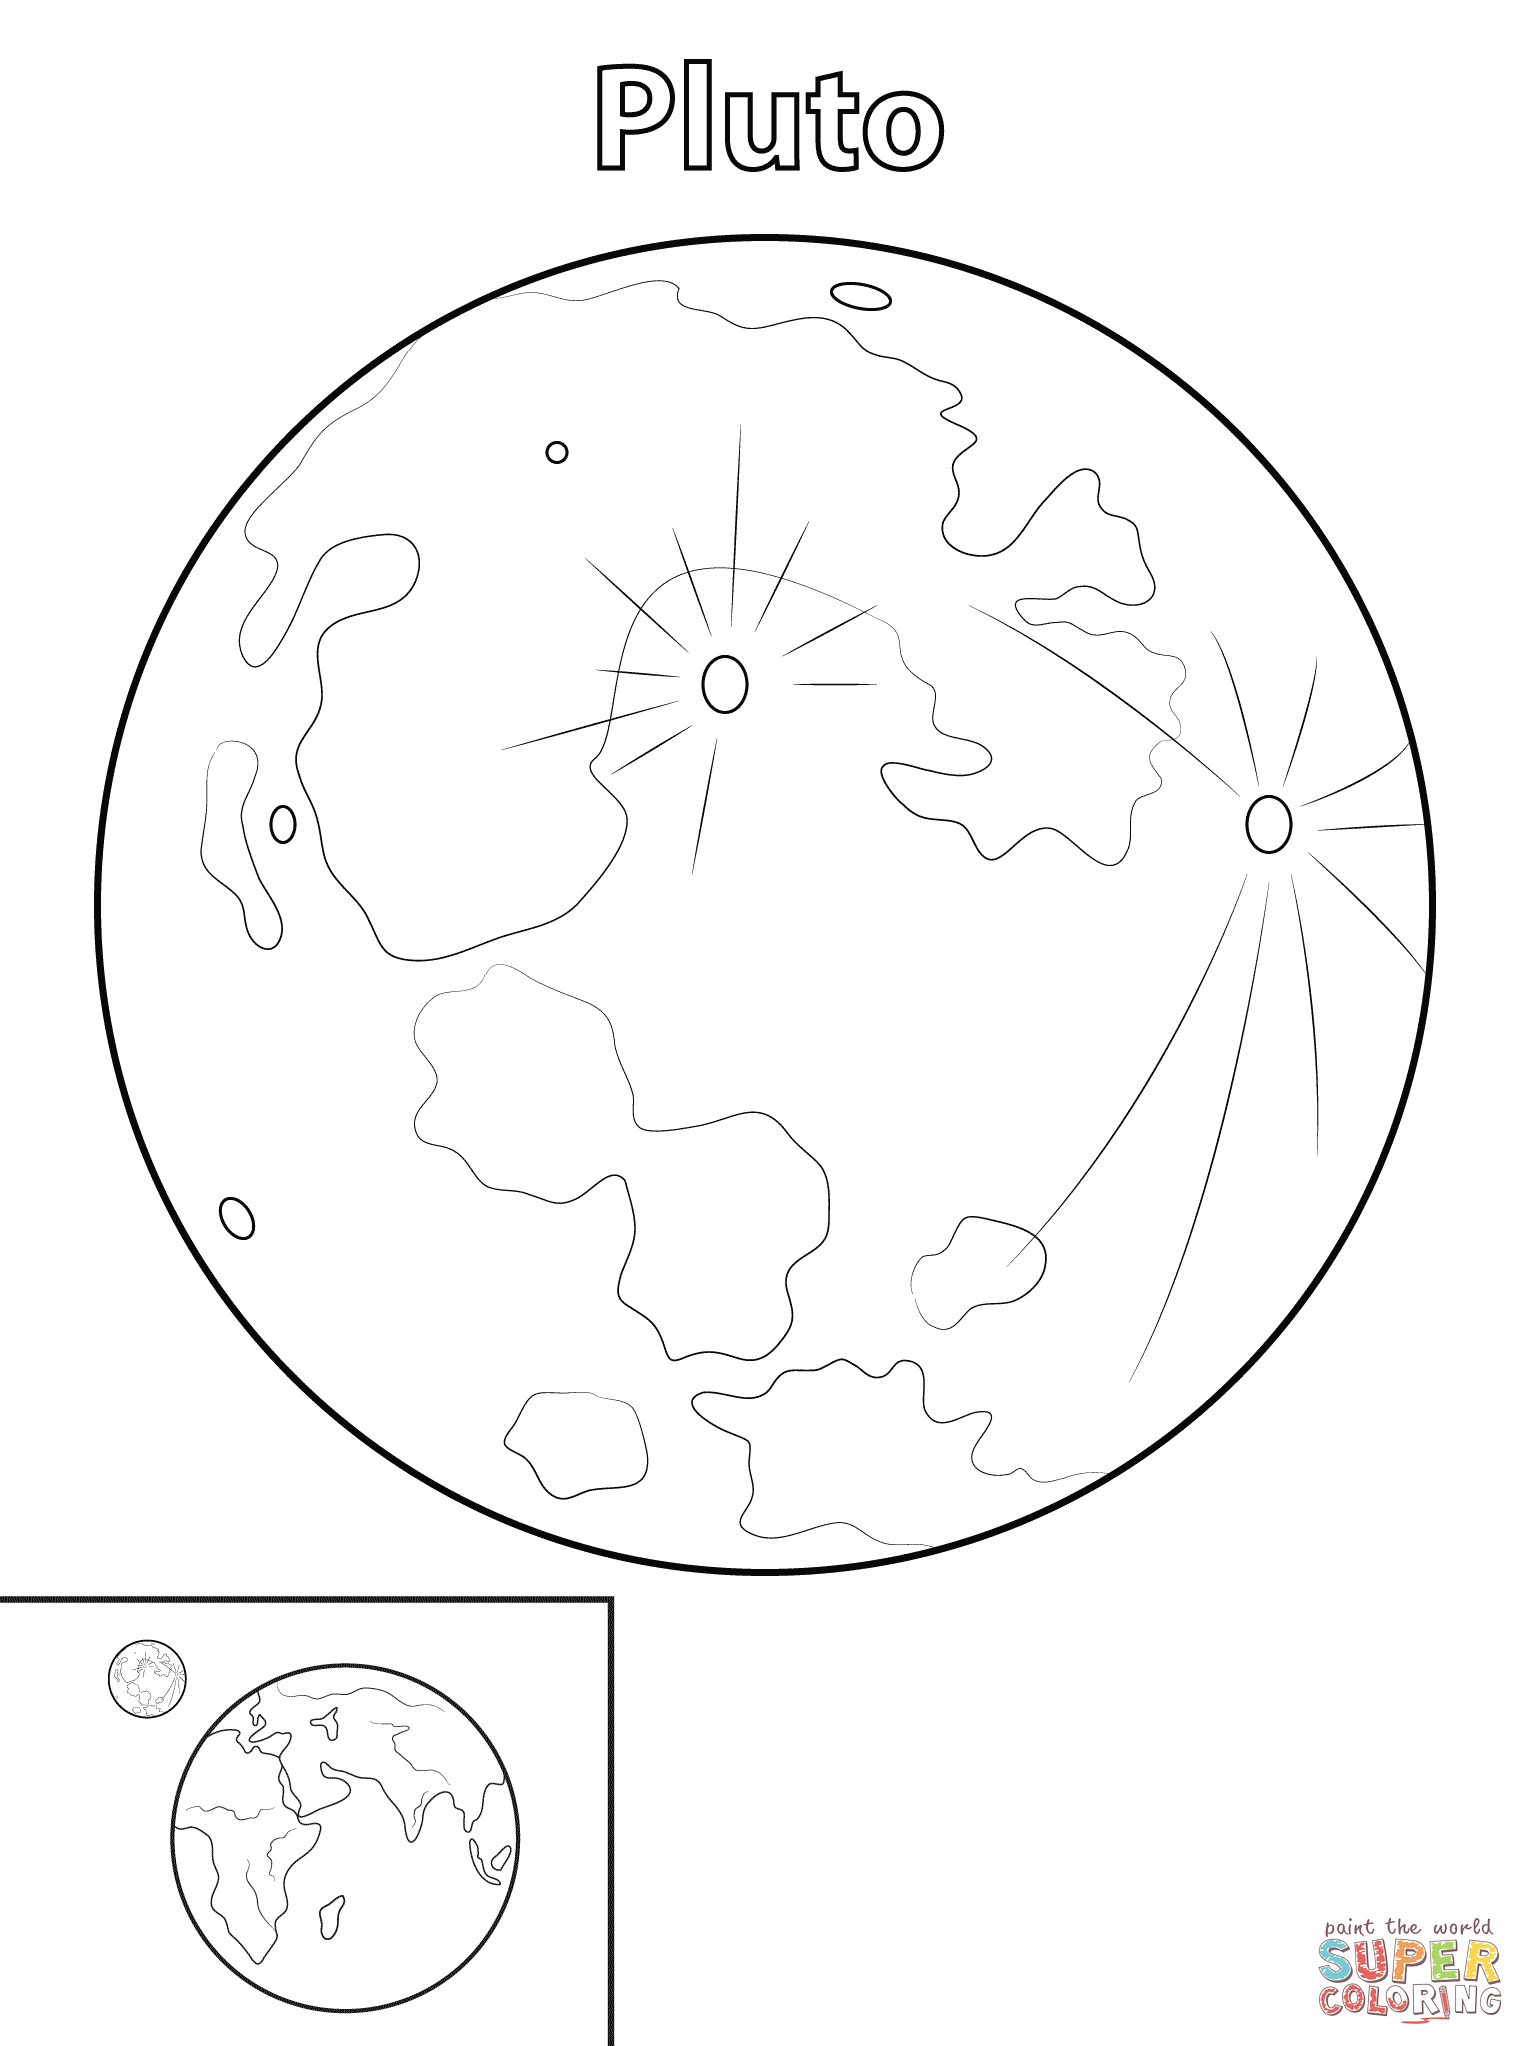 Pluto Planet Coloring Page   Free Printable Coloring Pages ...